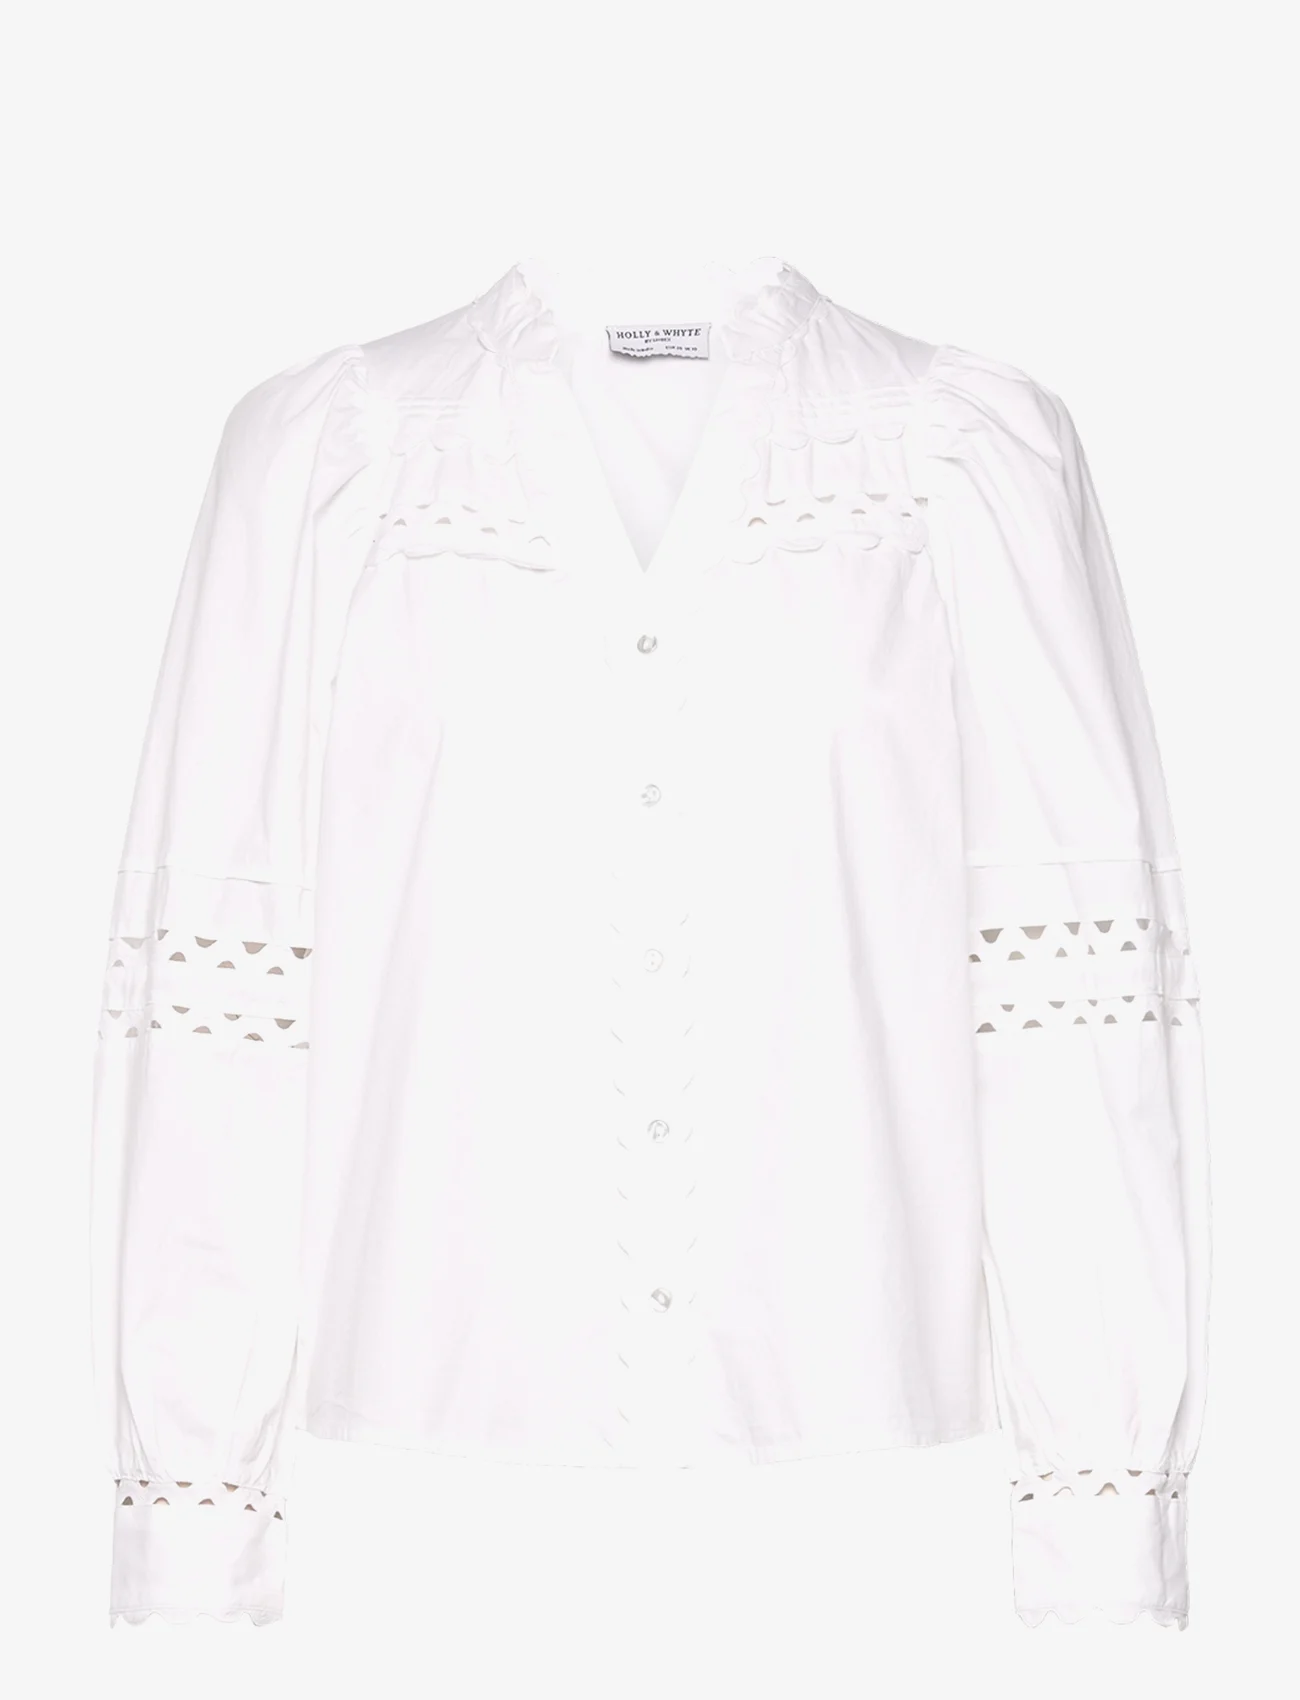 Lindex - Blouse Lorin - long-sleeved blouses - white - 0